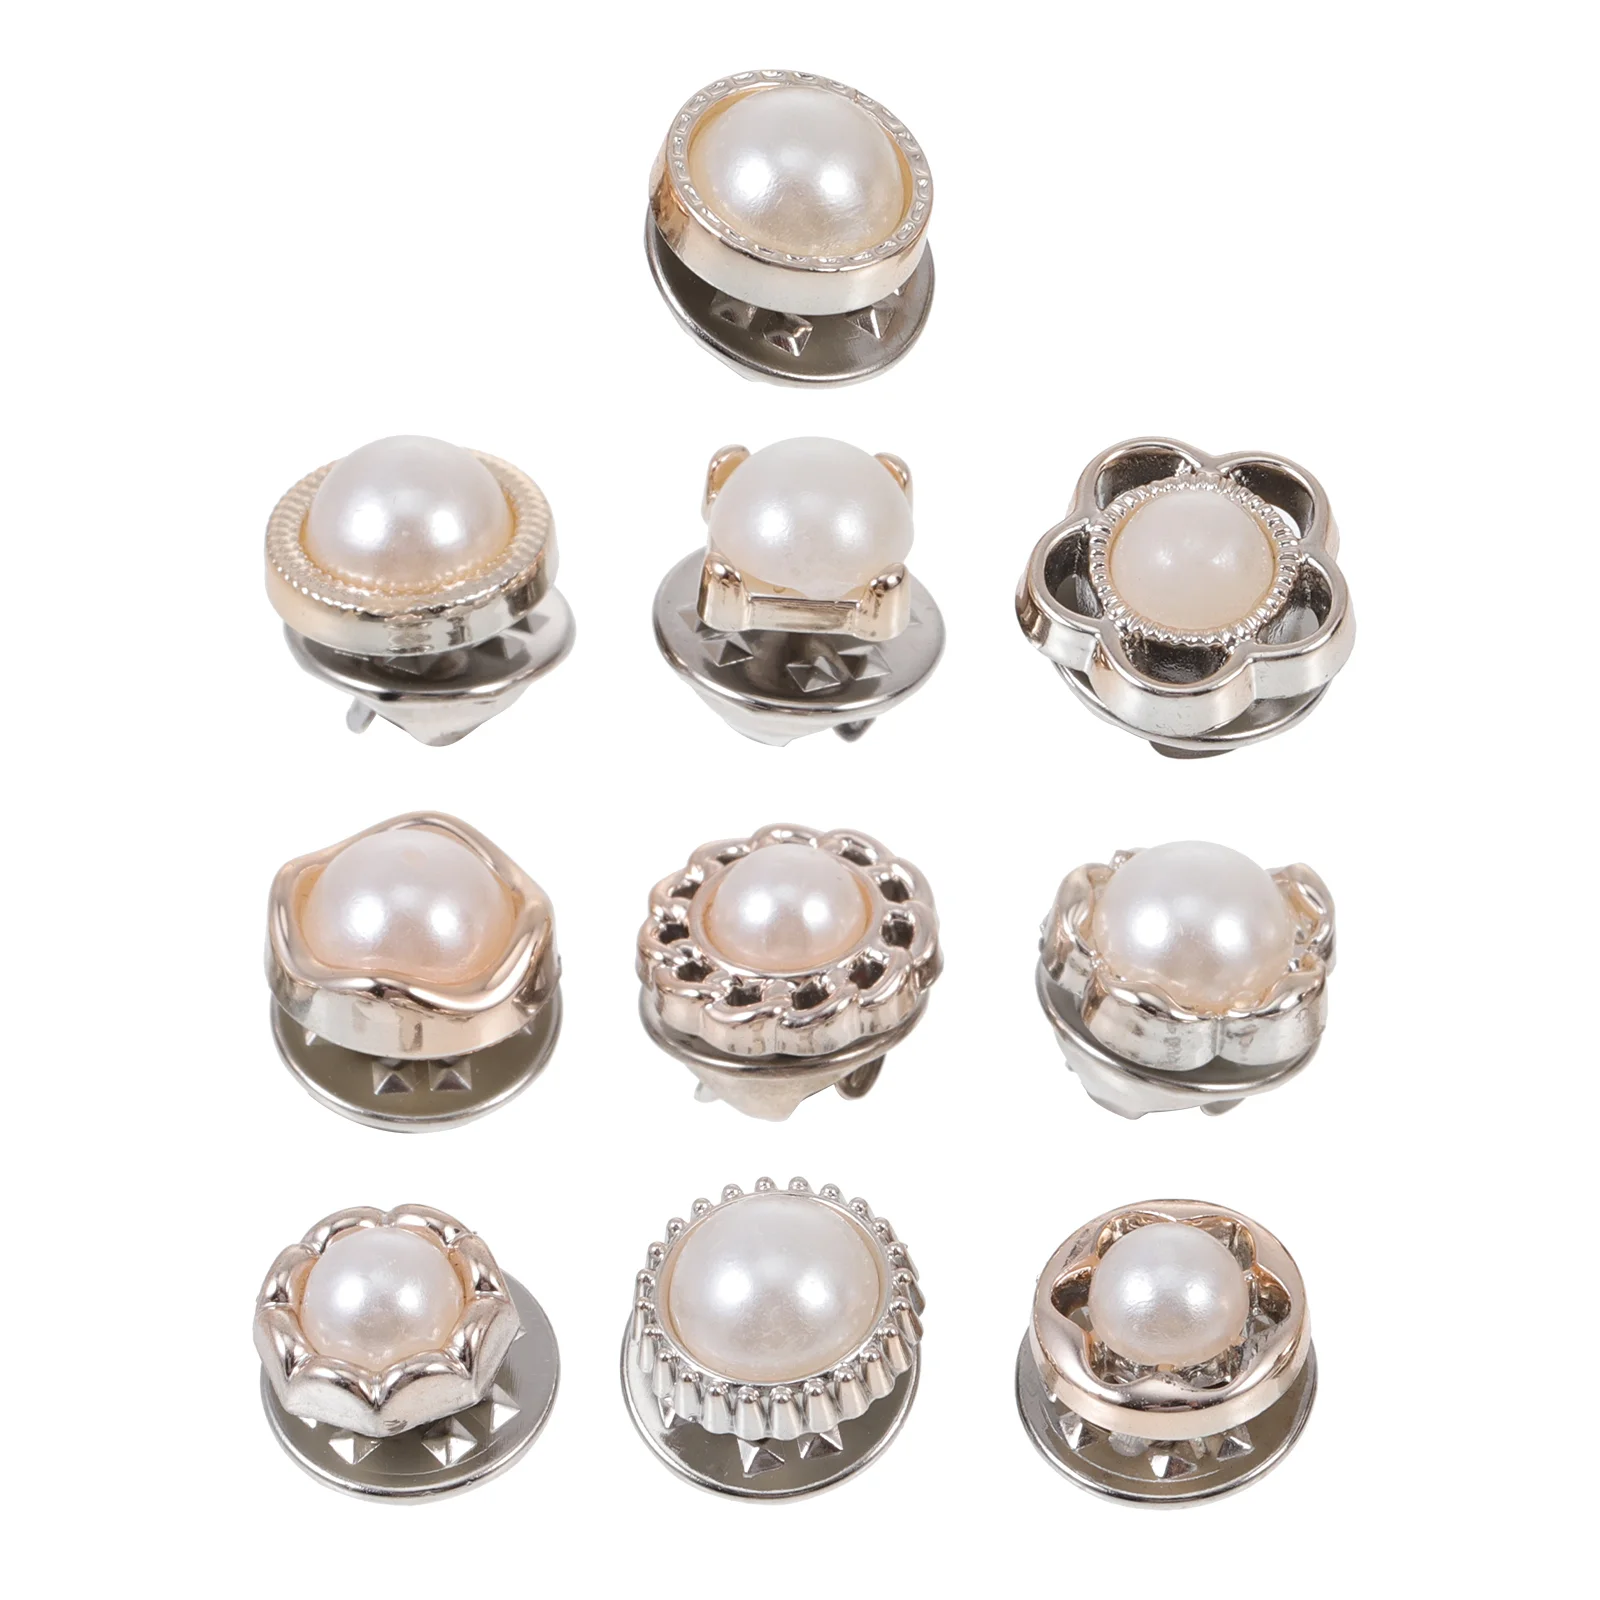 

Buttons Pearl Brooch Button Pinsshirt Sewing Crafts Clothes Sew Womenset Nail Free Brooches Pin Lapel Embellishment Snap